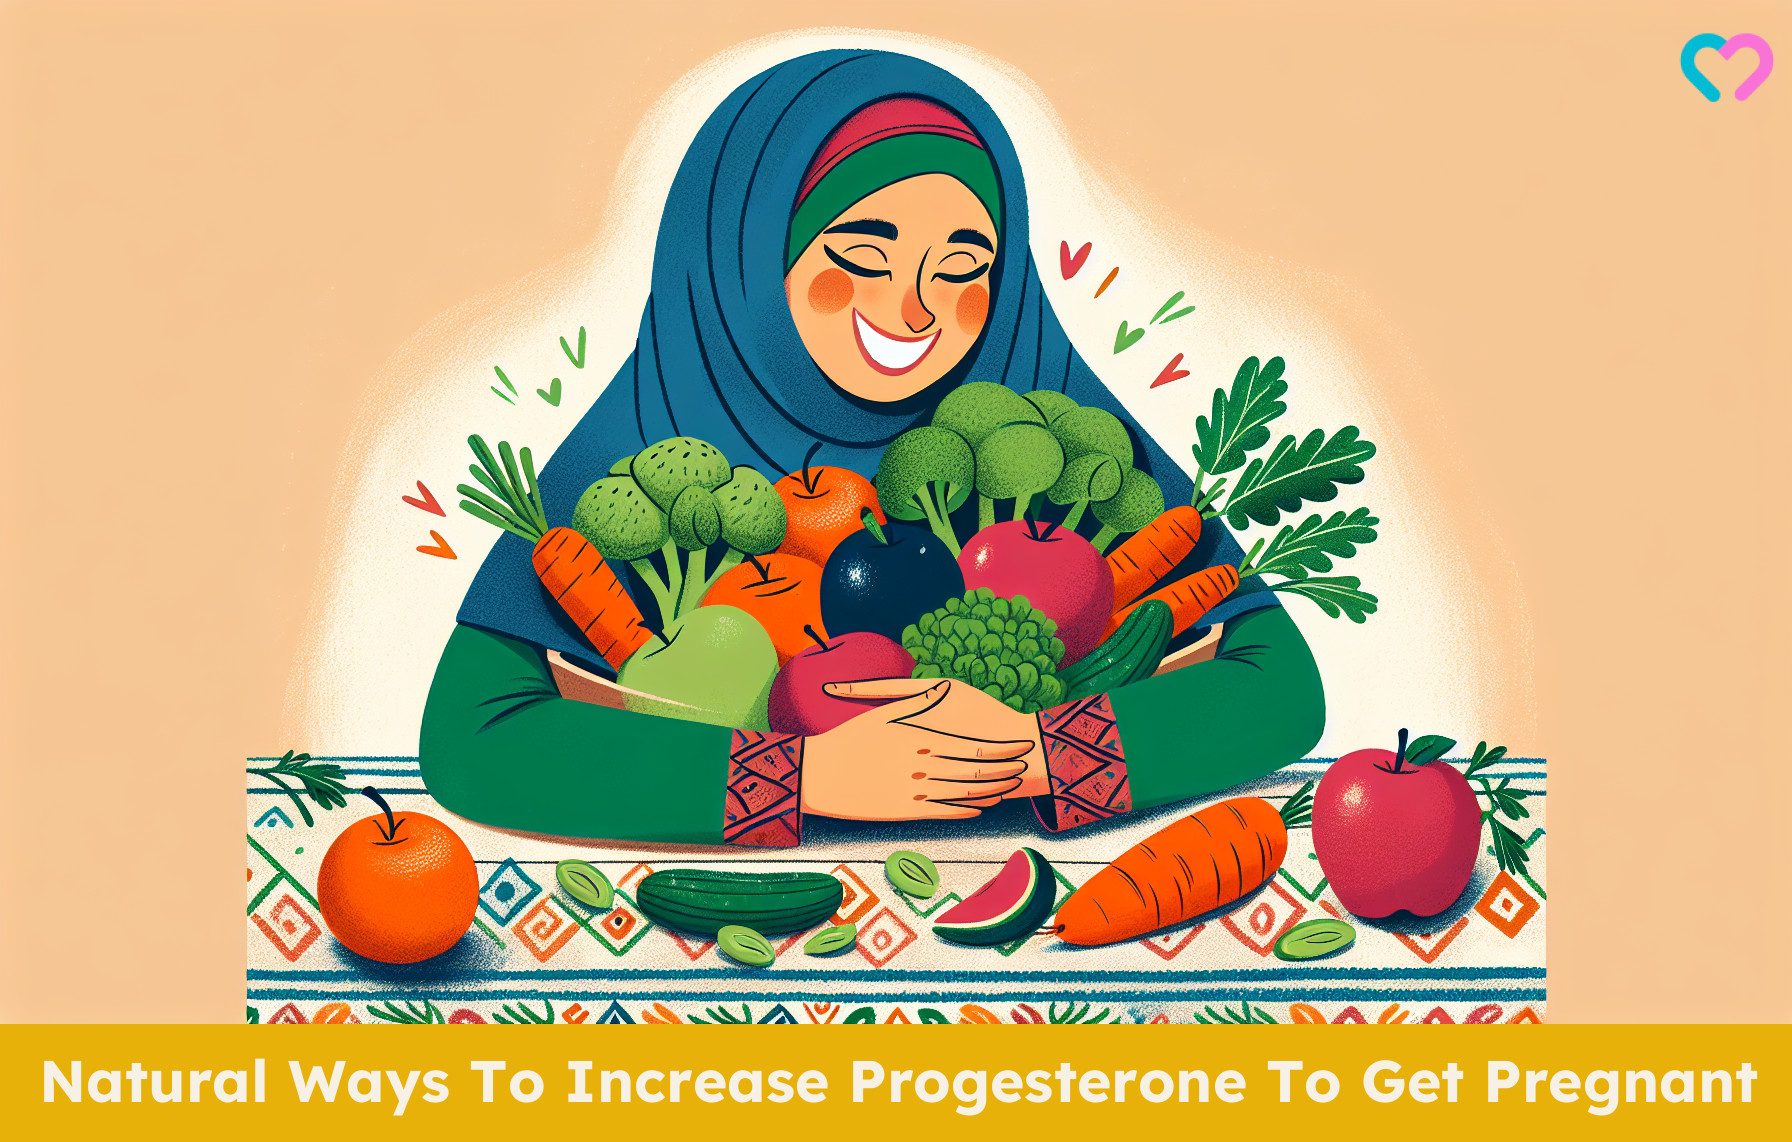 Increase Progesterone To Get Pregnant_illustration